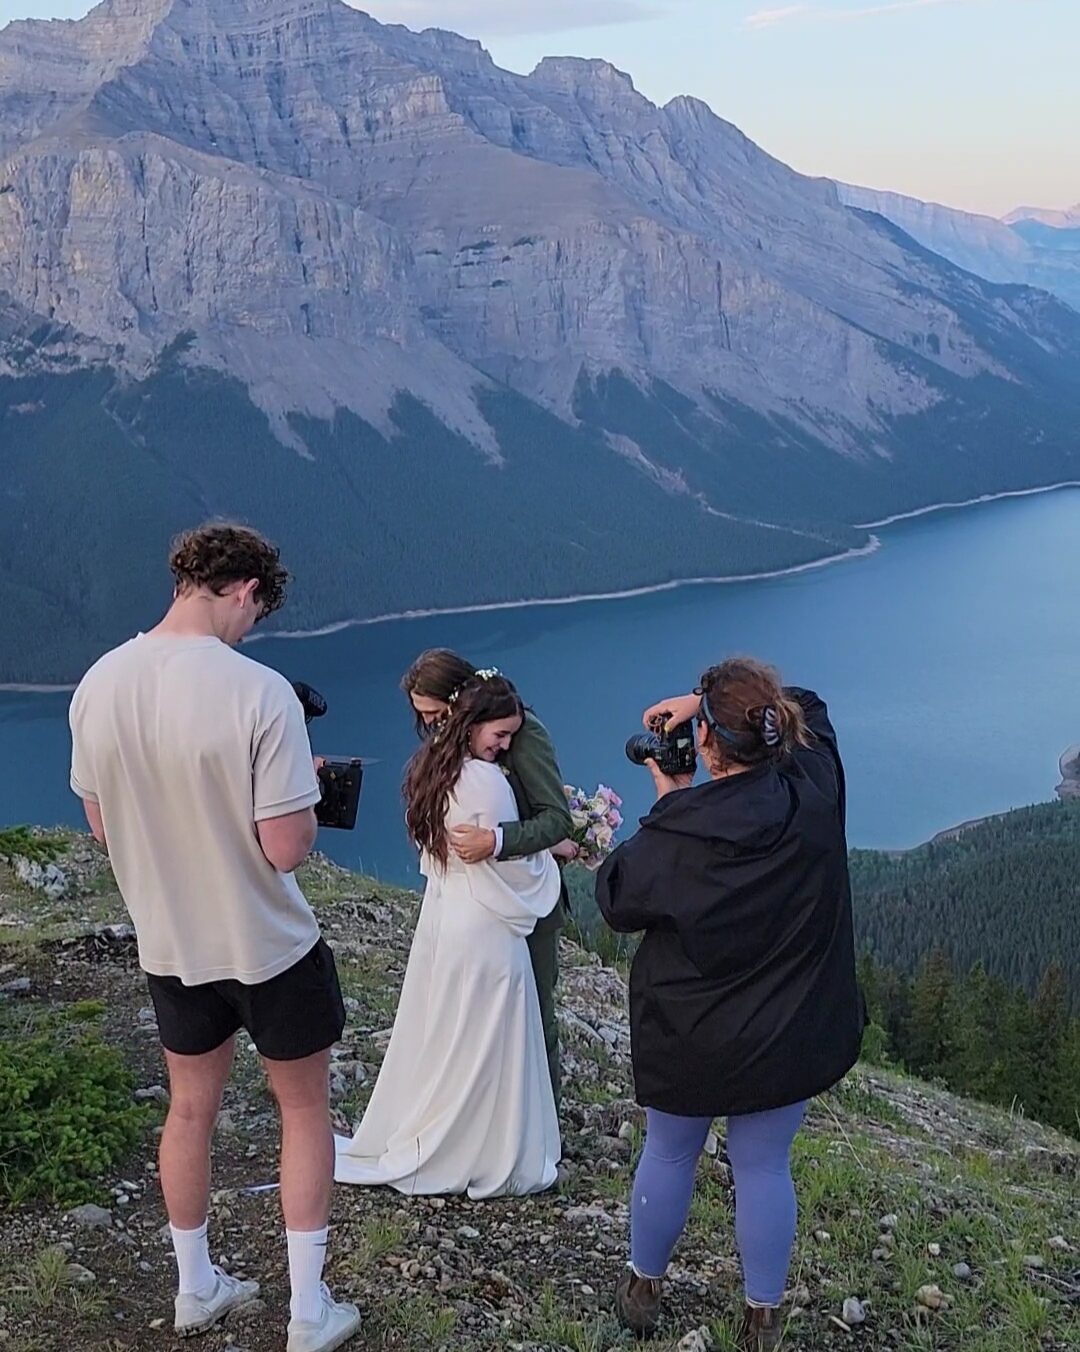 Doxa Photography was our elopement photographer and Owen Belanger was our videographer for our backcountry elopement in Banff